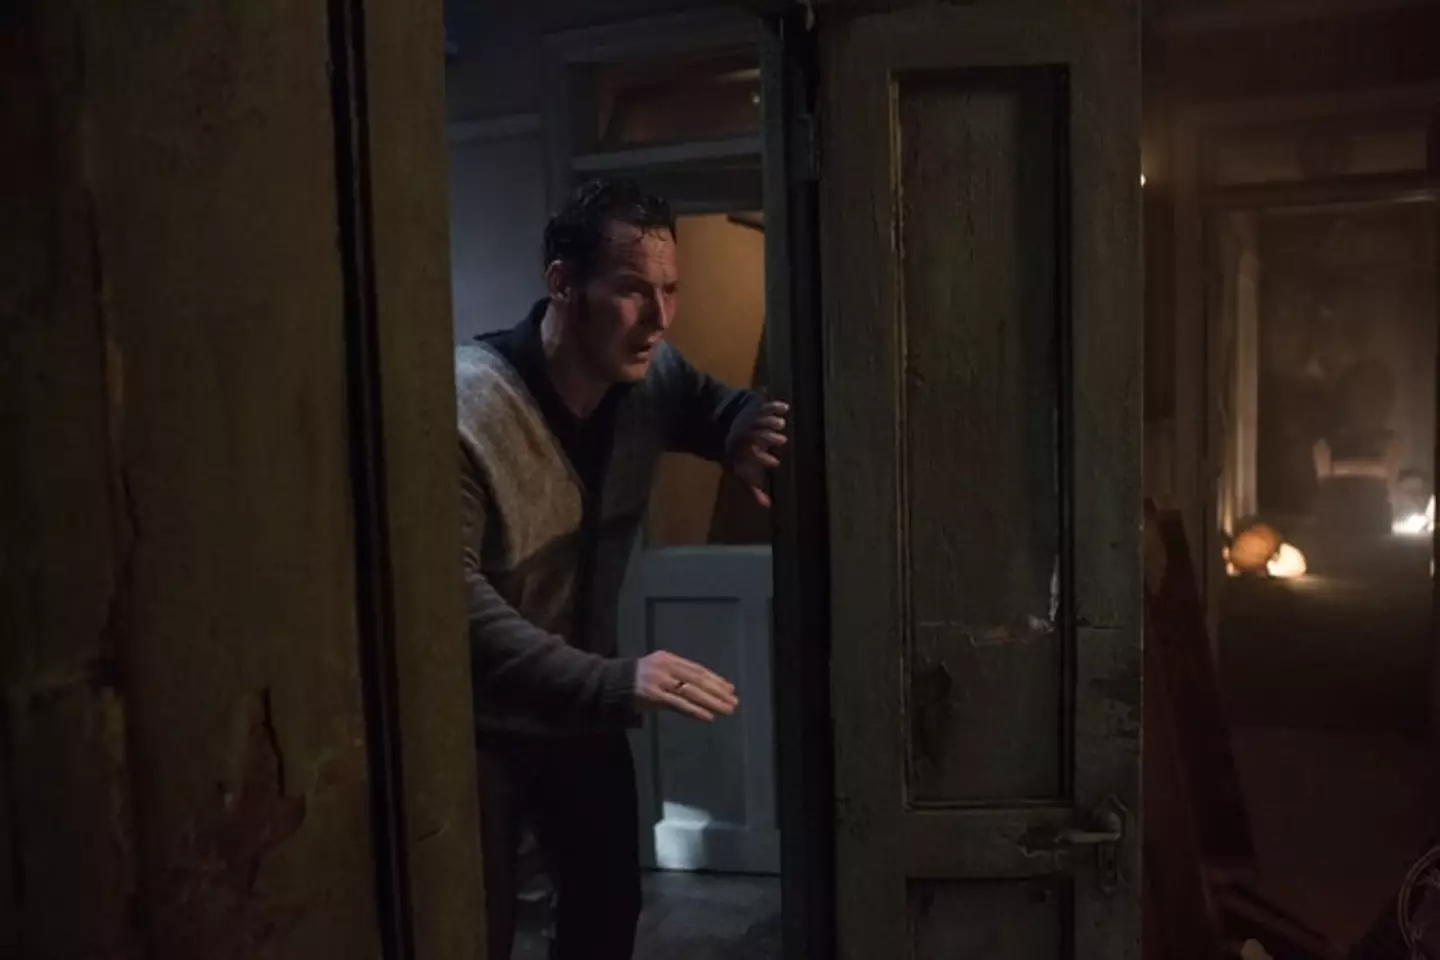 Reddit users are begging the man to open the door, like Patrick Wilson here in The Conjuring 2.